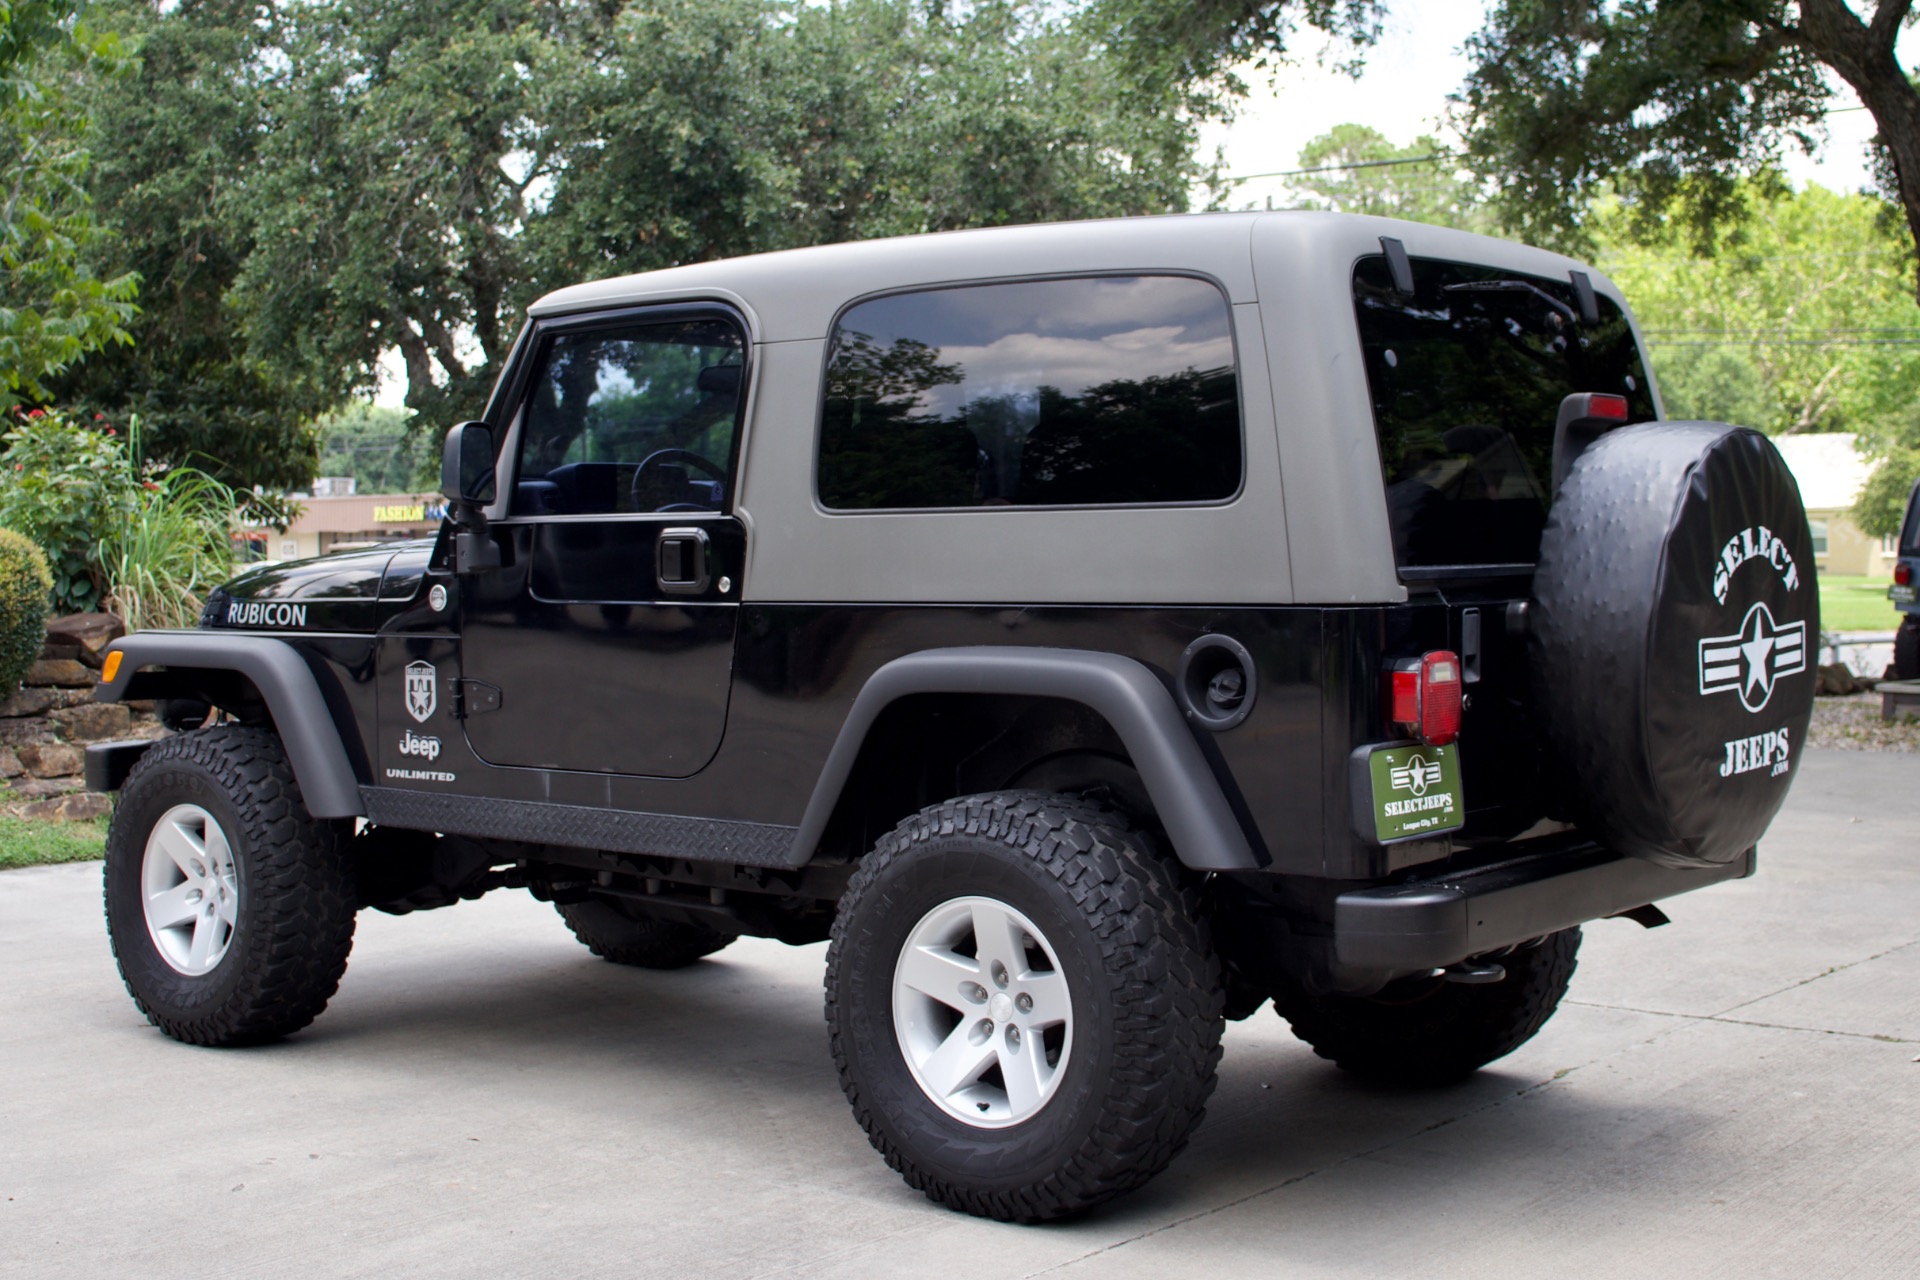 Used-2005-Jeep-Wrangler-Unlimited-Rubicon-Unlimited-Rubicon